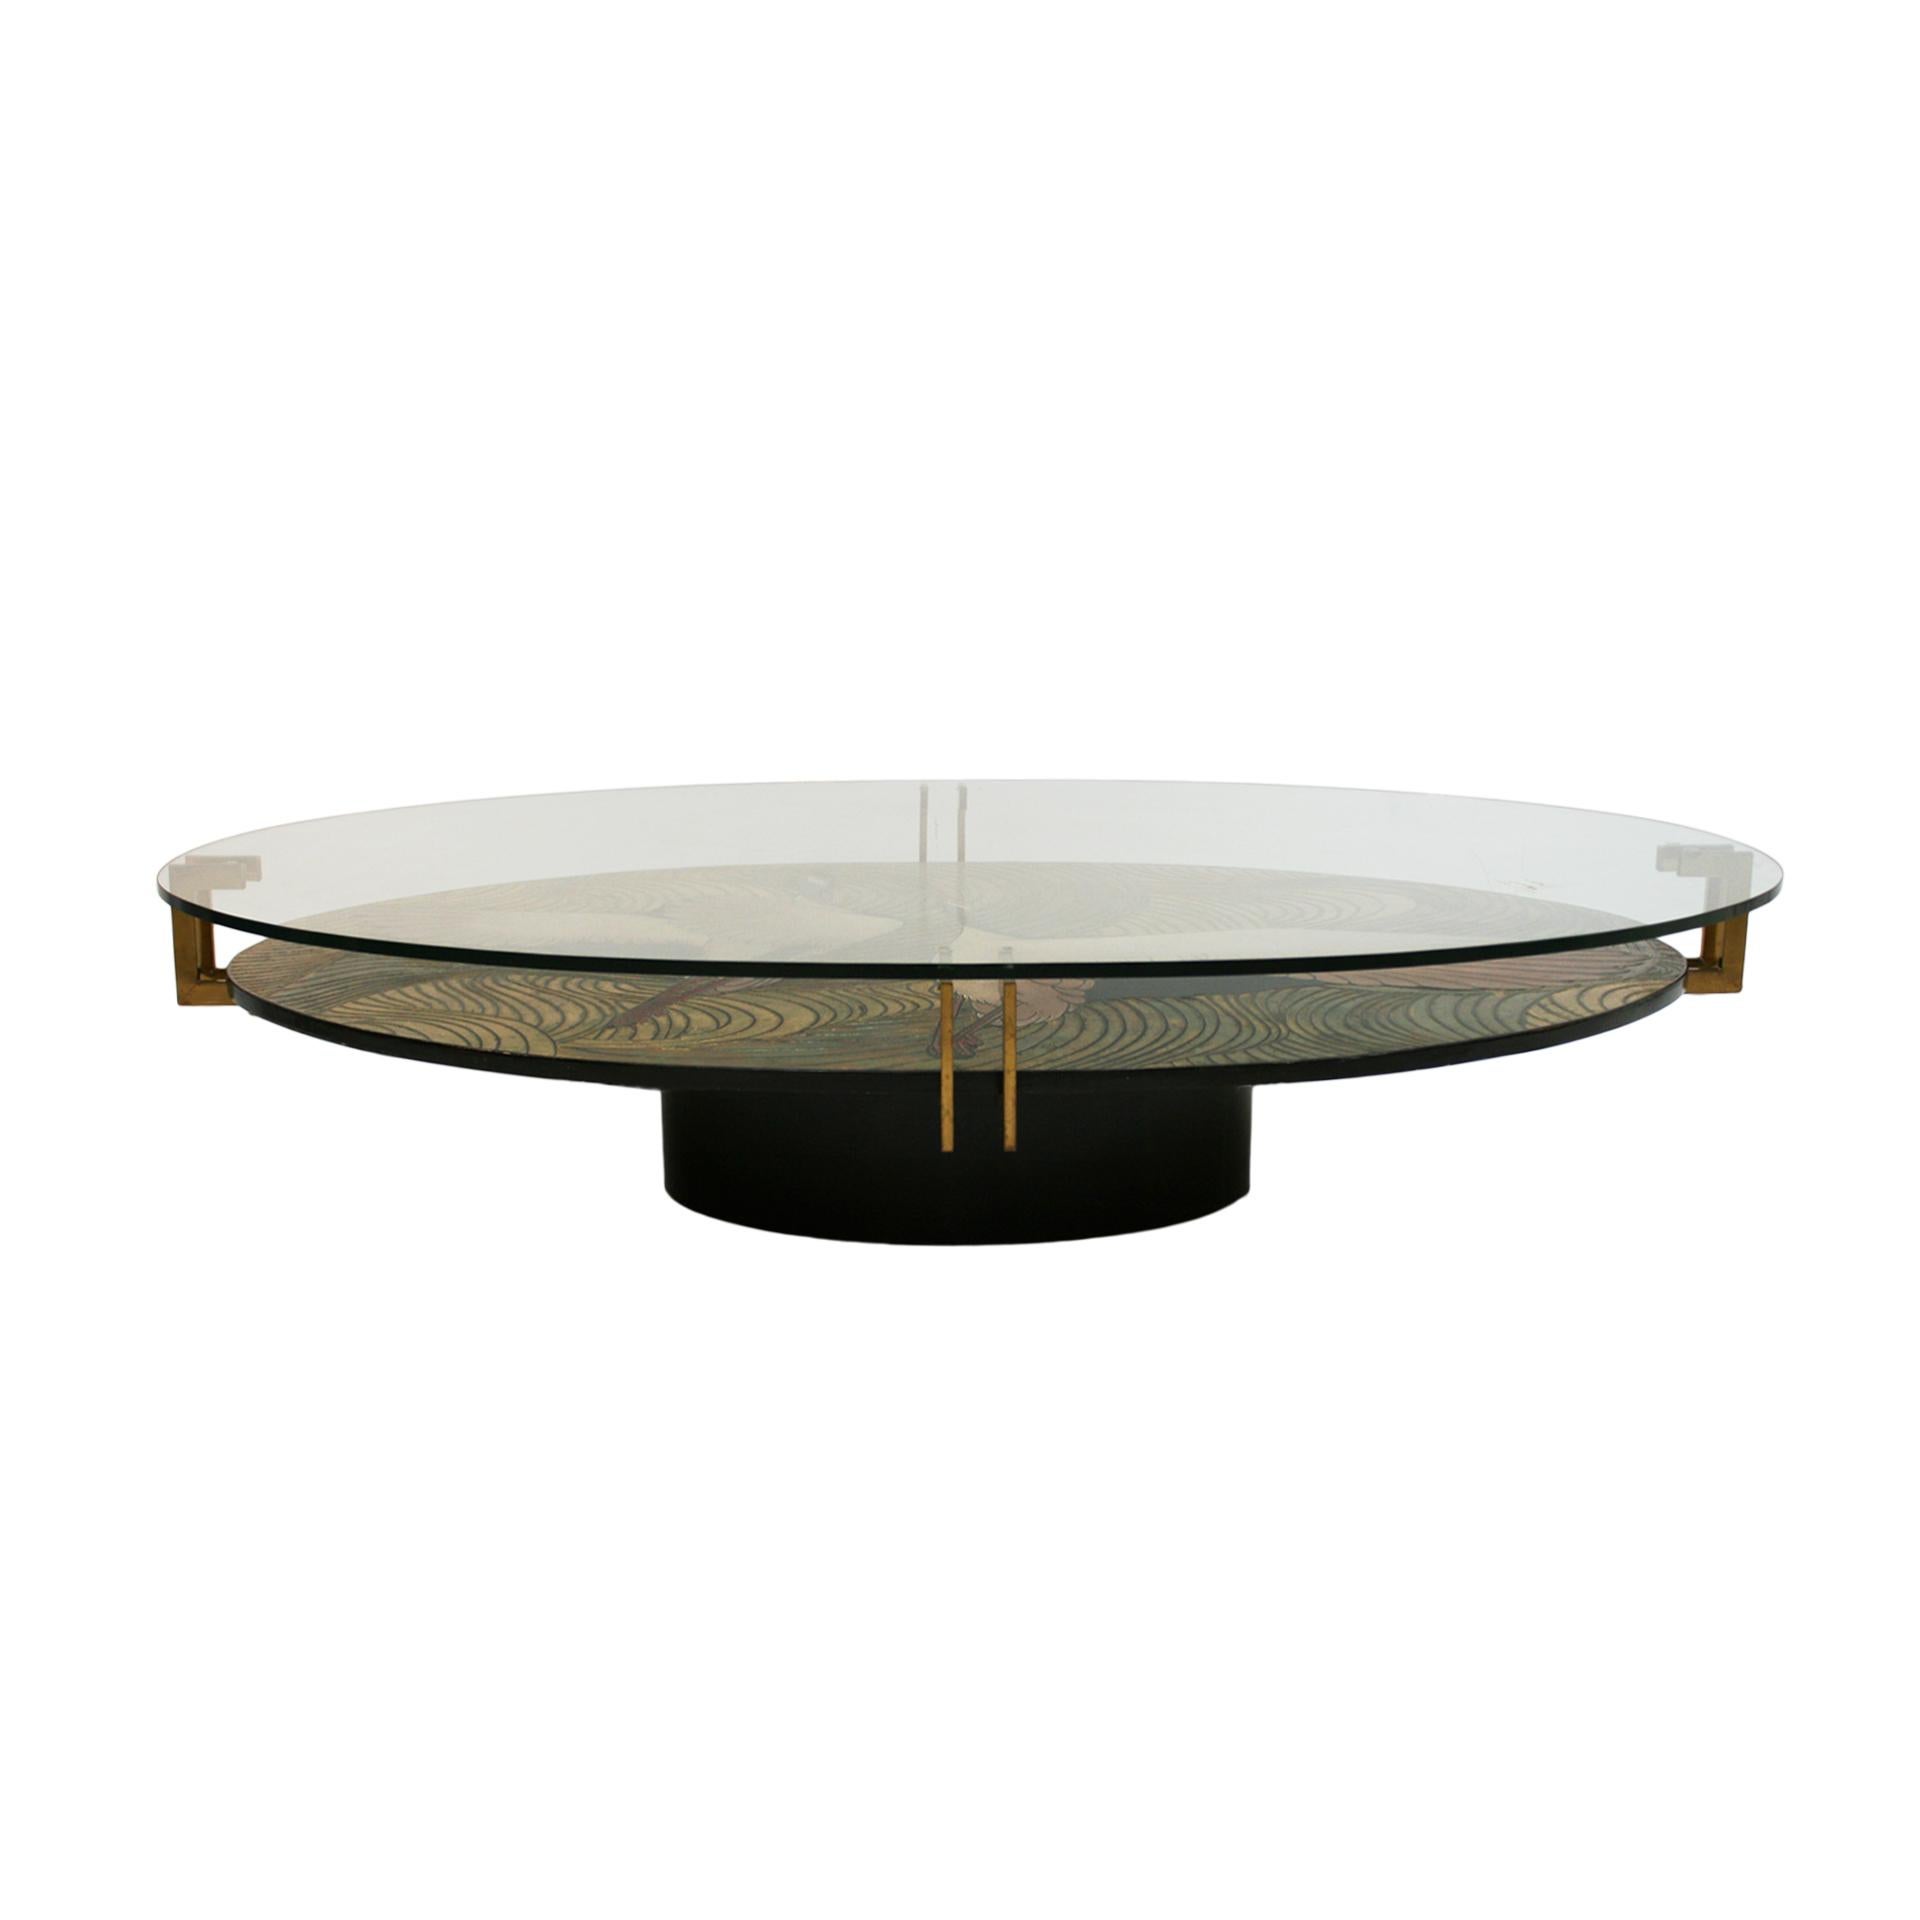 Art Deco Early 20th Century Coromandel Lacquered Wood and Brass Oval French Table